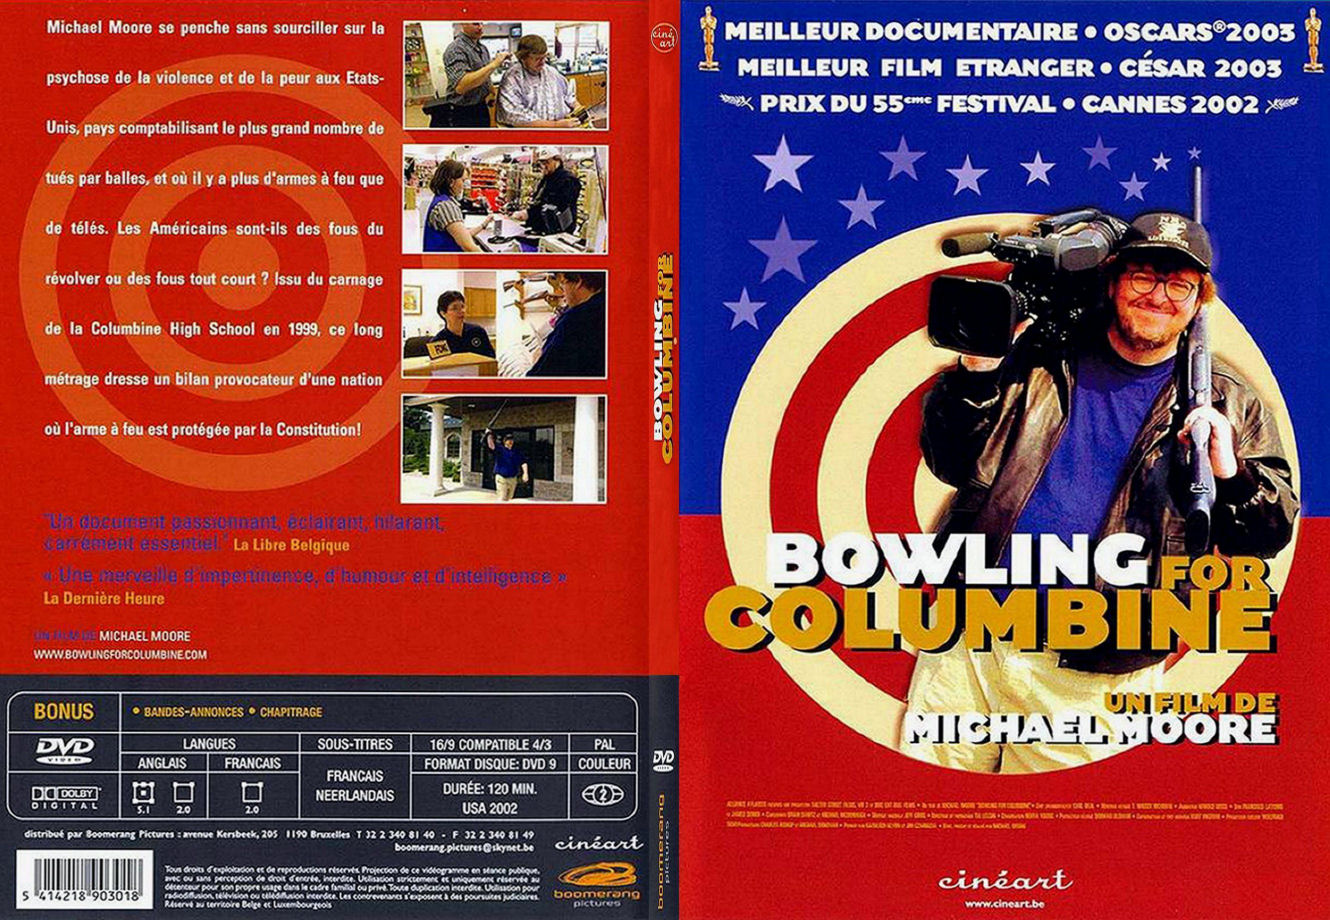 Jaquette DVD Bowling for Columbine - SLIM